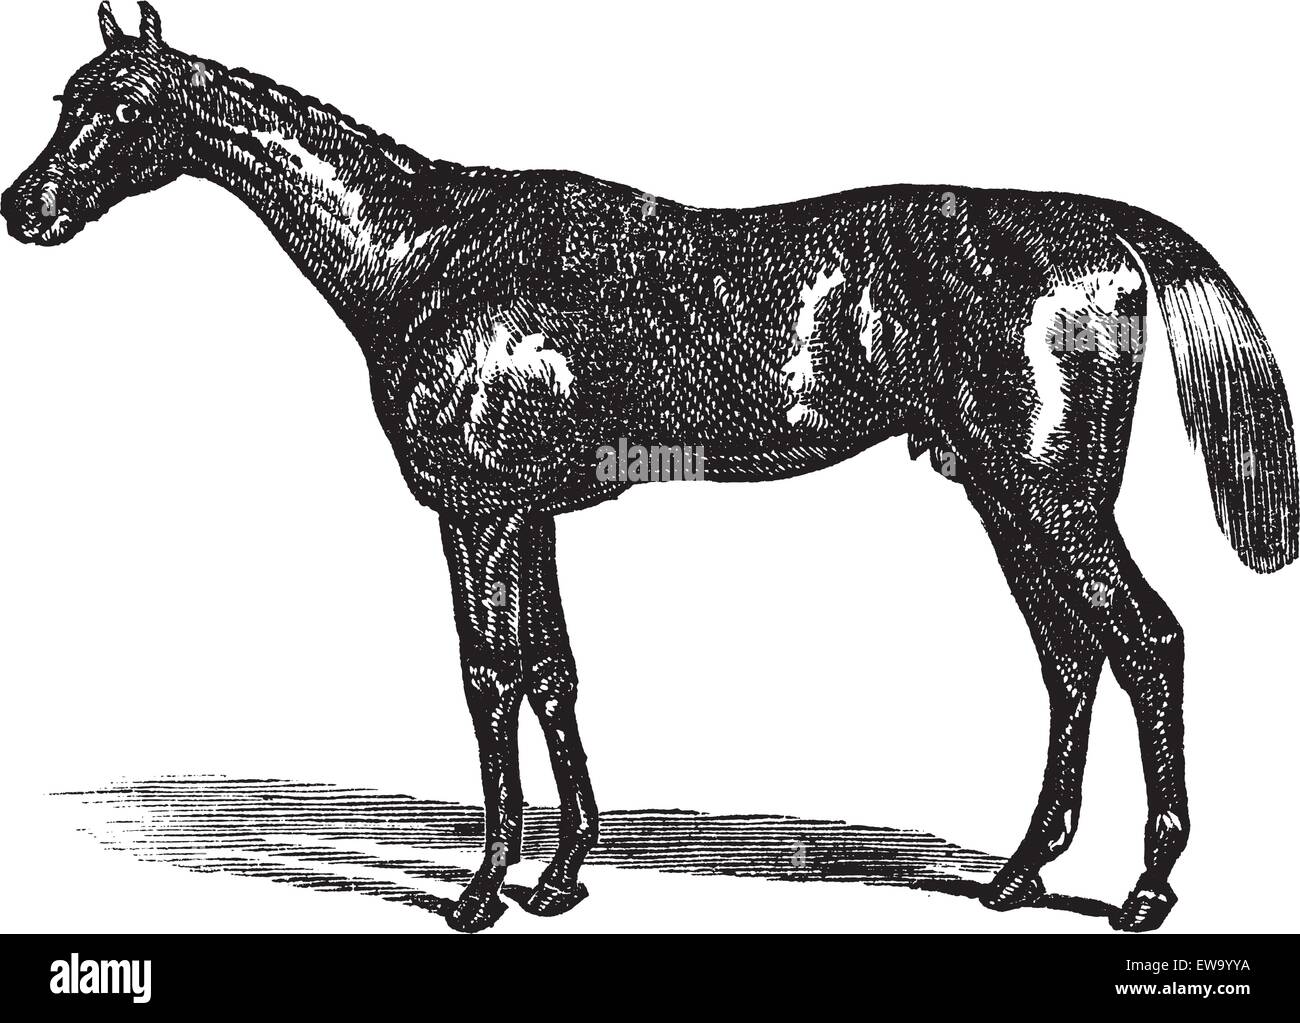 Thoroughbred or Equus ferus caballus, vintage engraving. Old engraved illustration of a Thoroughbred. Stock Vector